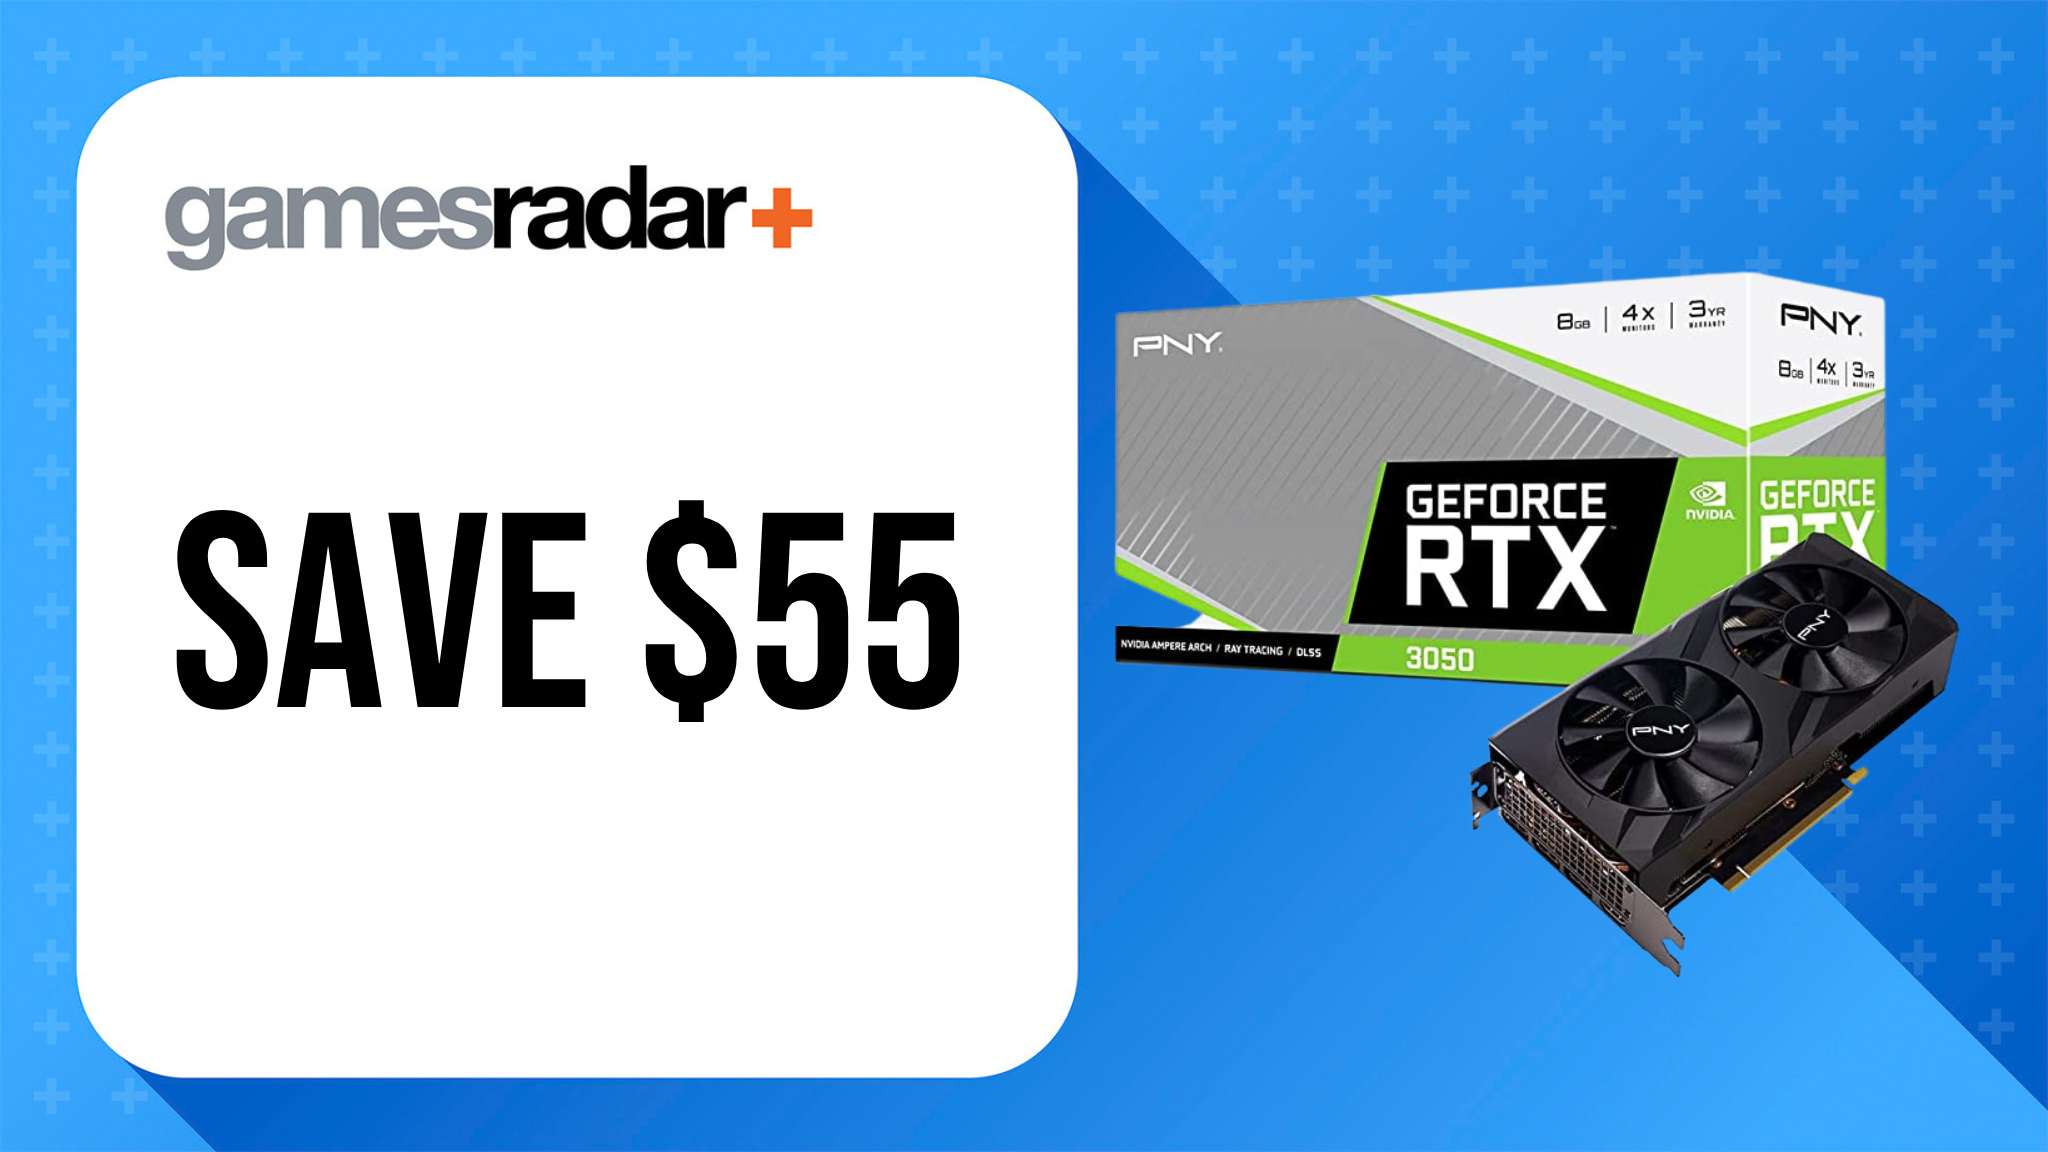 PNY GeForece RTX 3050 deal image with blue background and $55 saving stamp